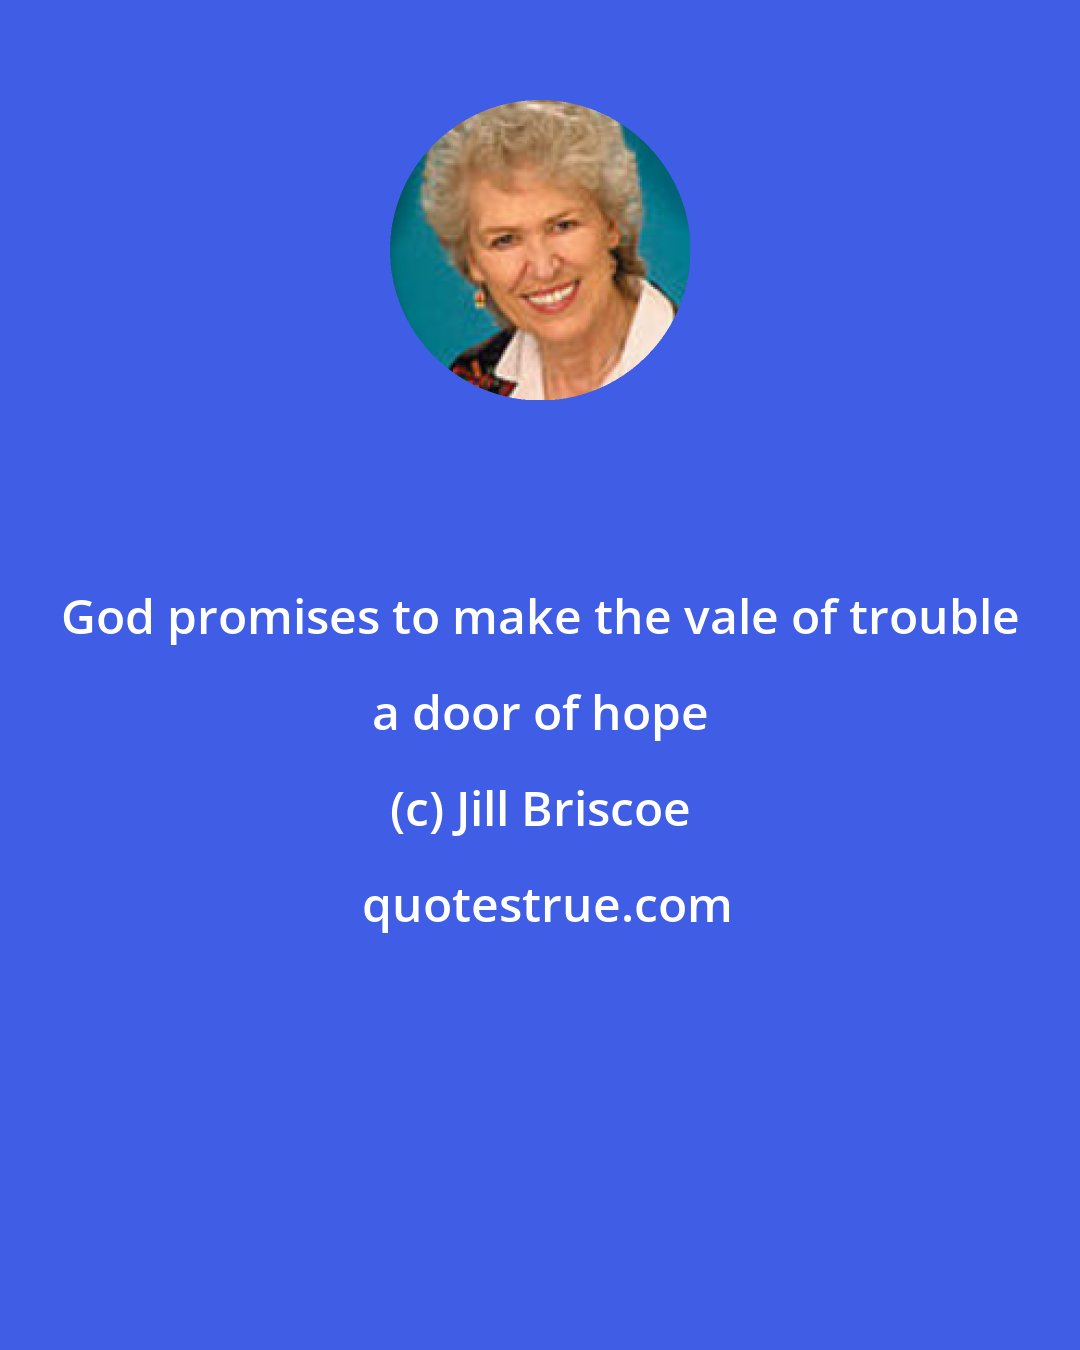 Jill Briscoe: God promises to make the vale of trouble a door of hope